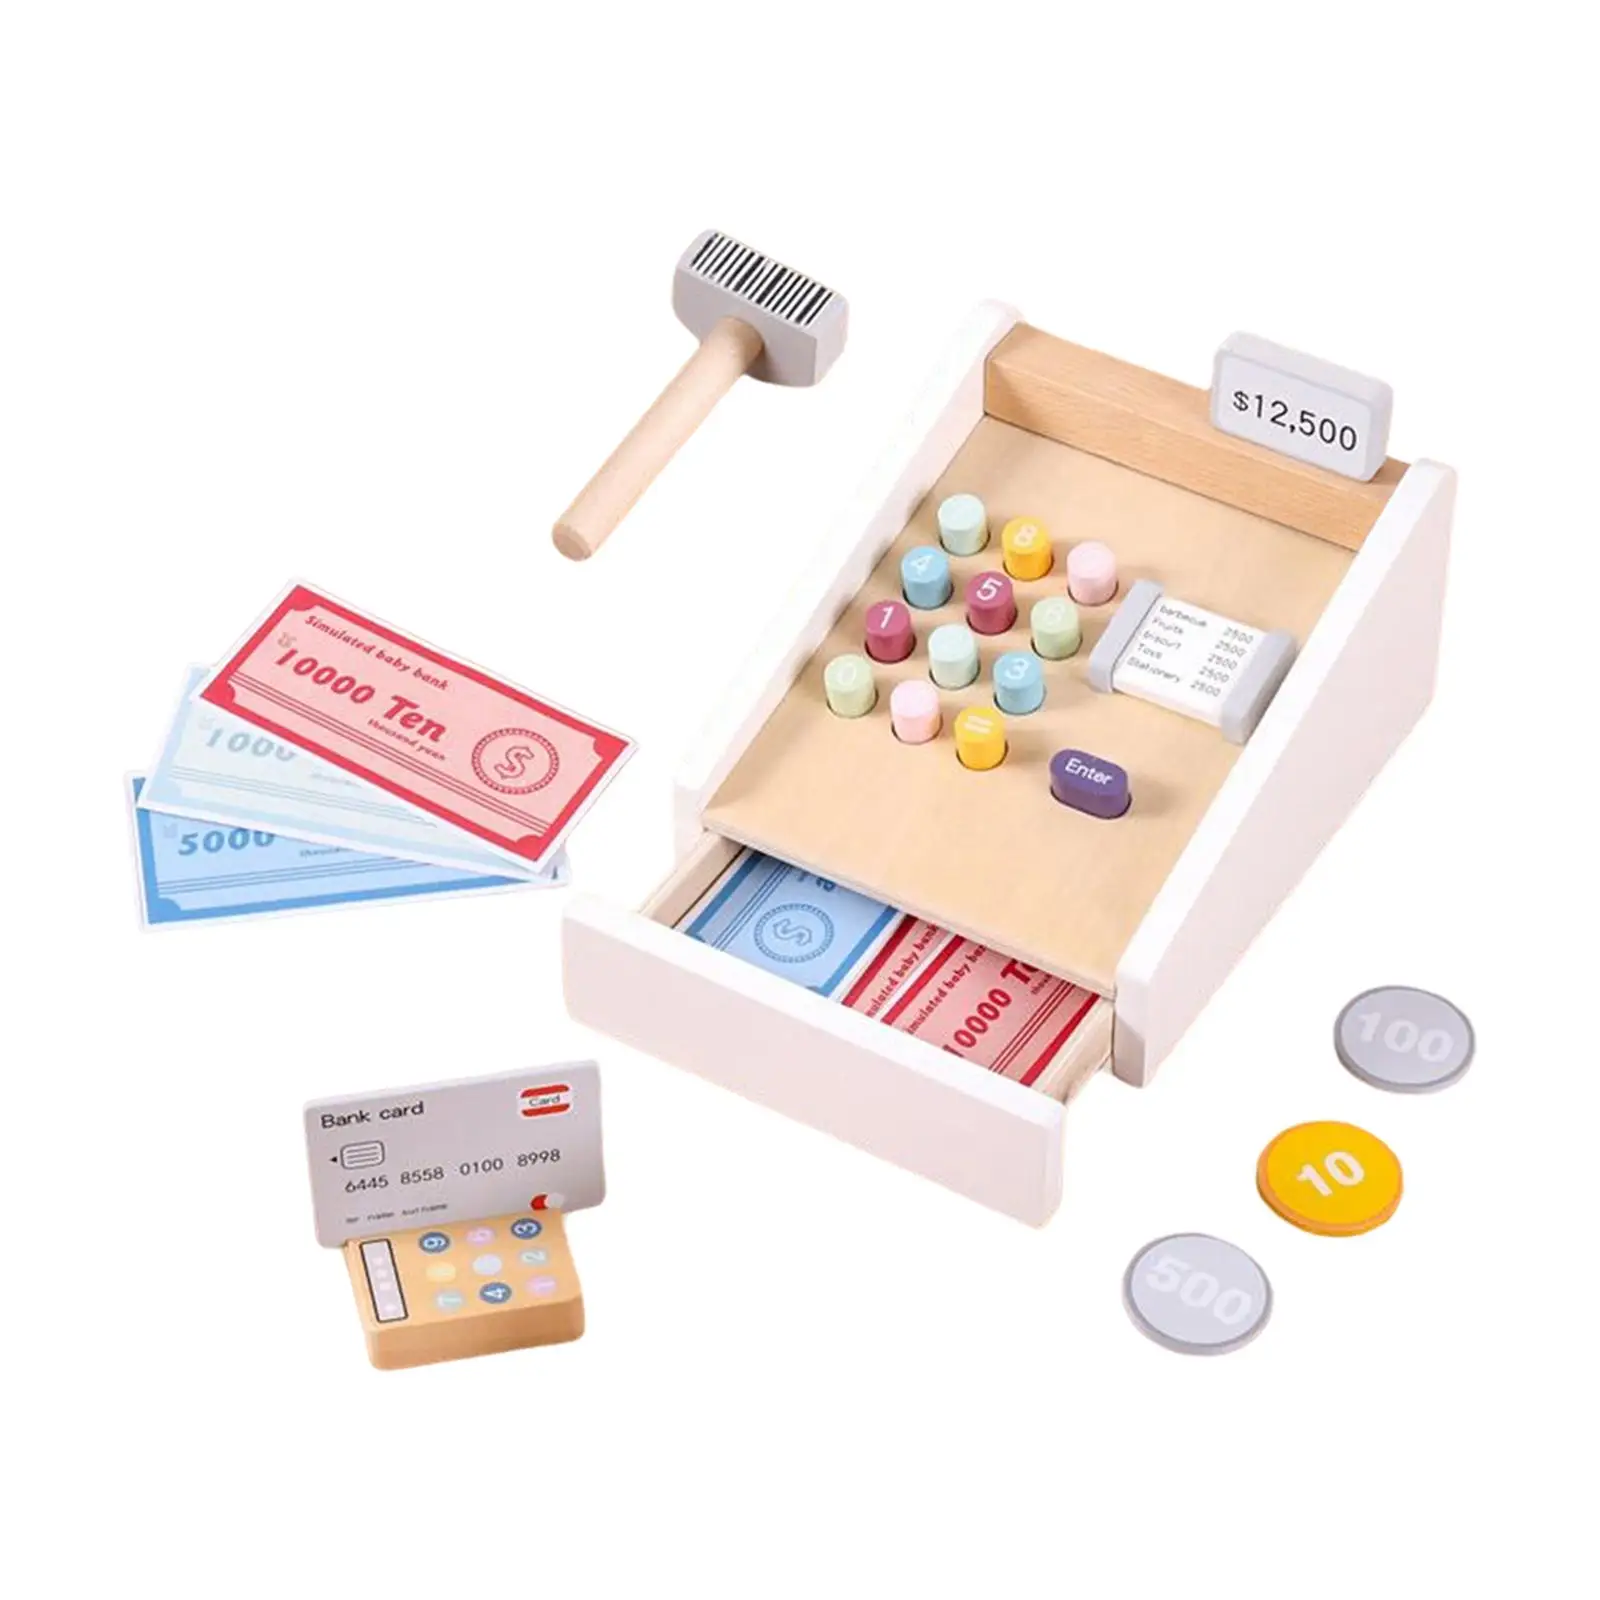 Simulation Cash Register Pretend Play with Accessories Social for Girls Boys